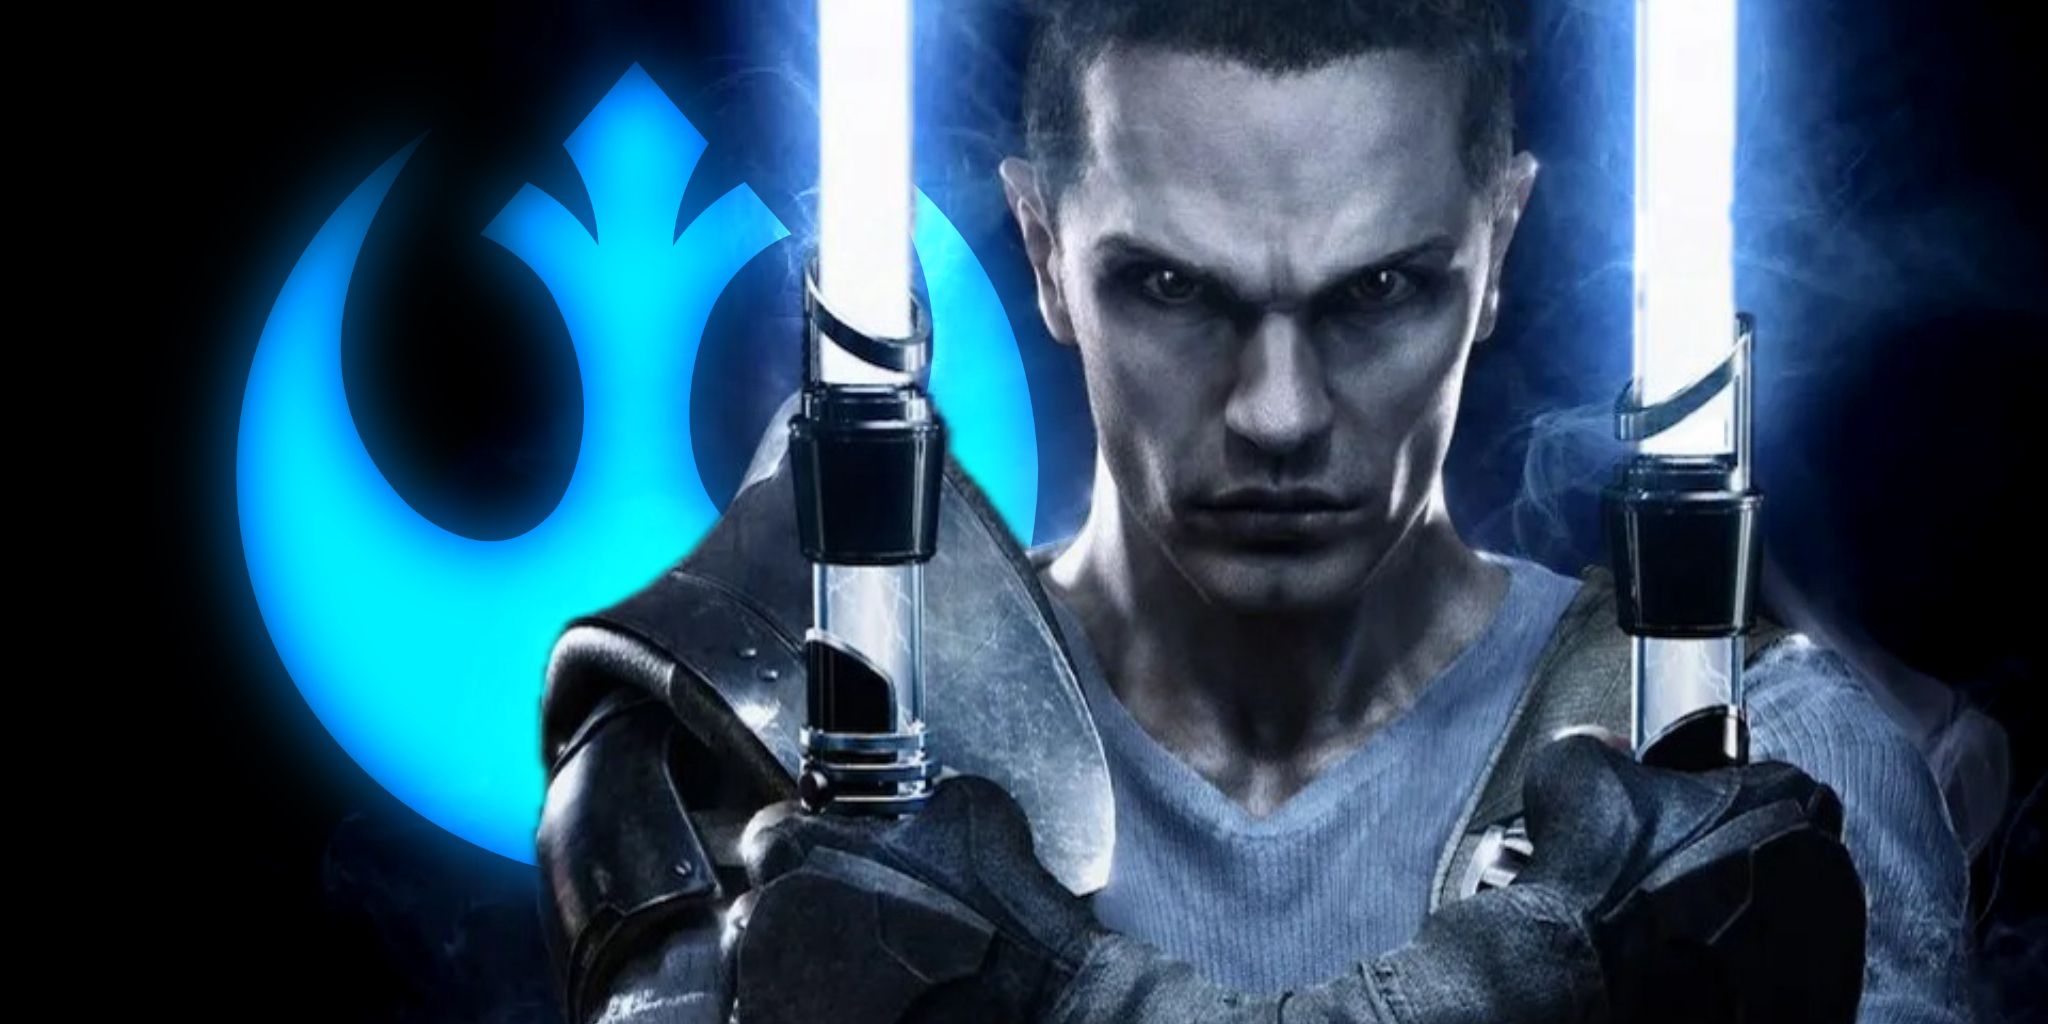 Sam Witwer's Starkiller with his lightsabers and a focused face superimposed over the Rebellion logo